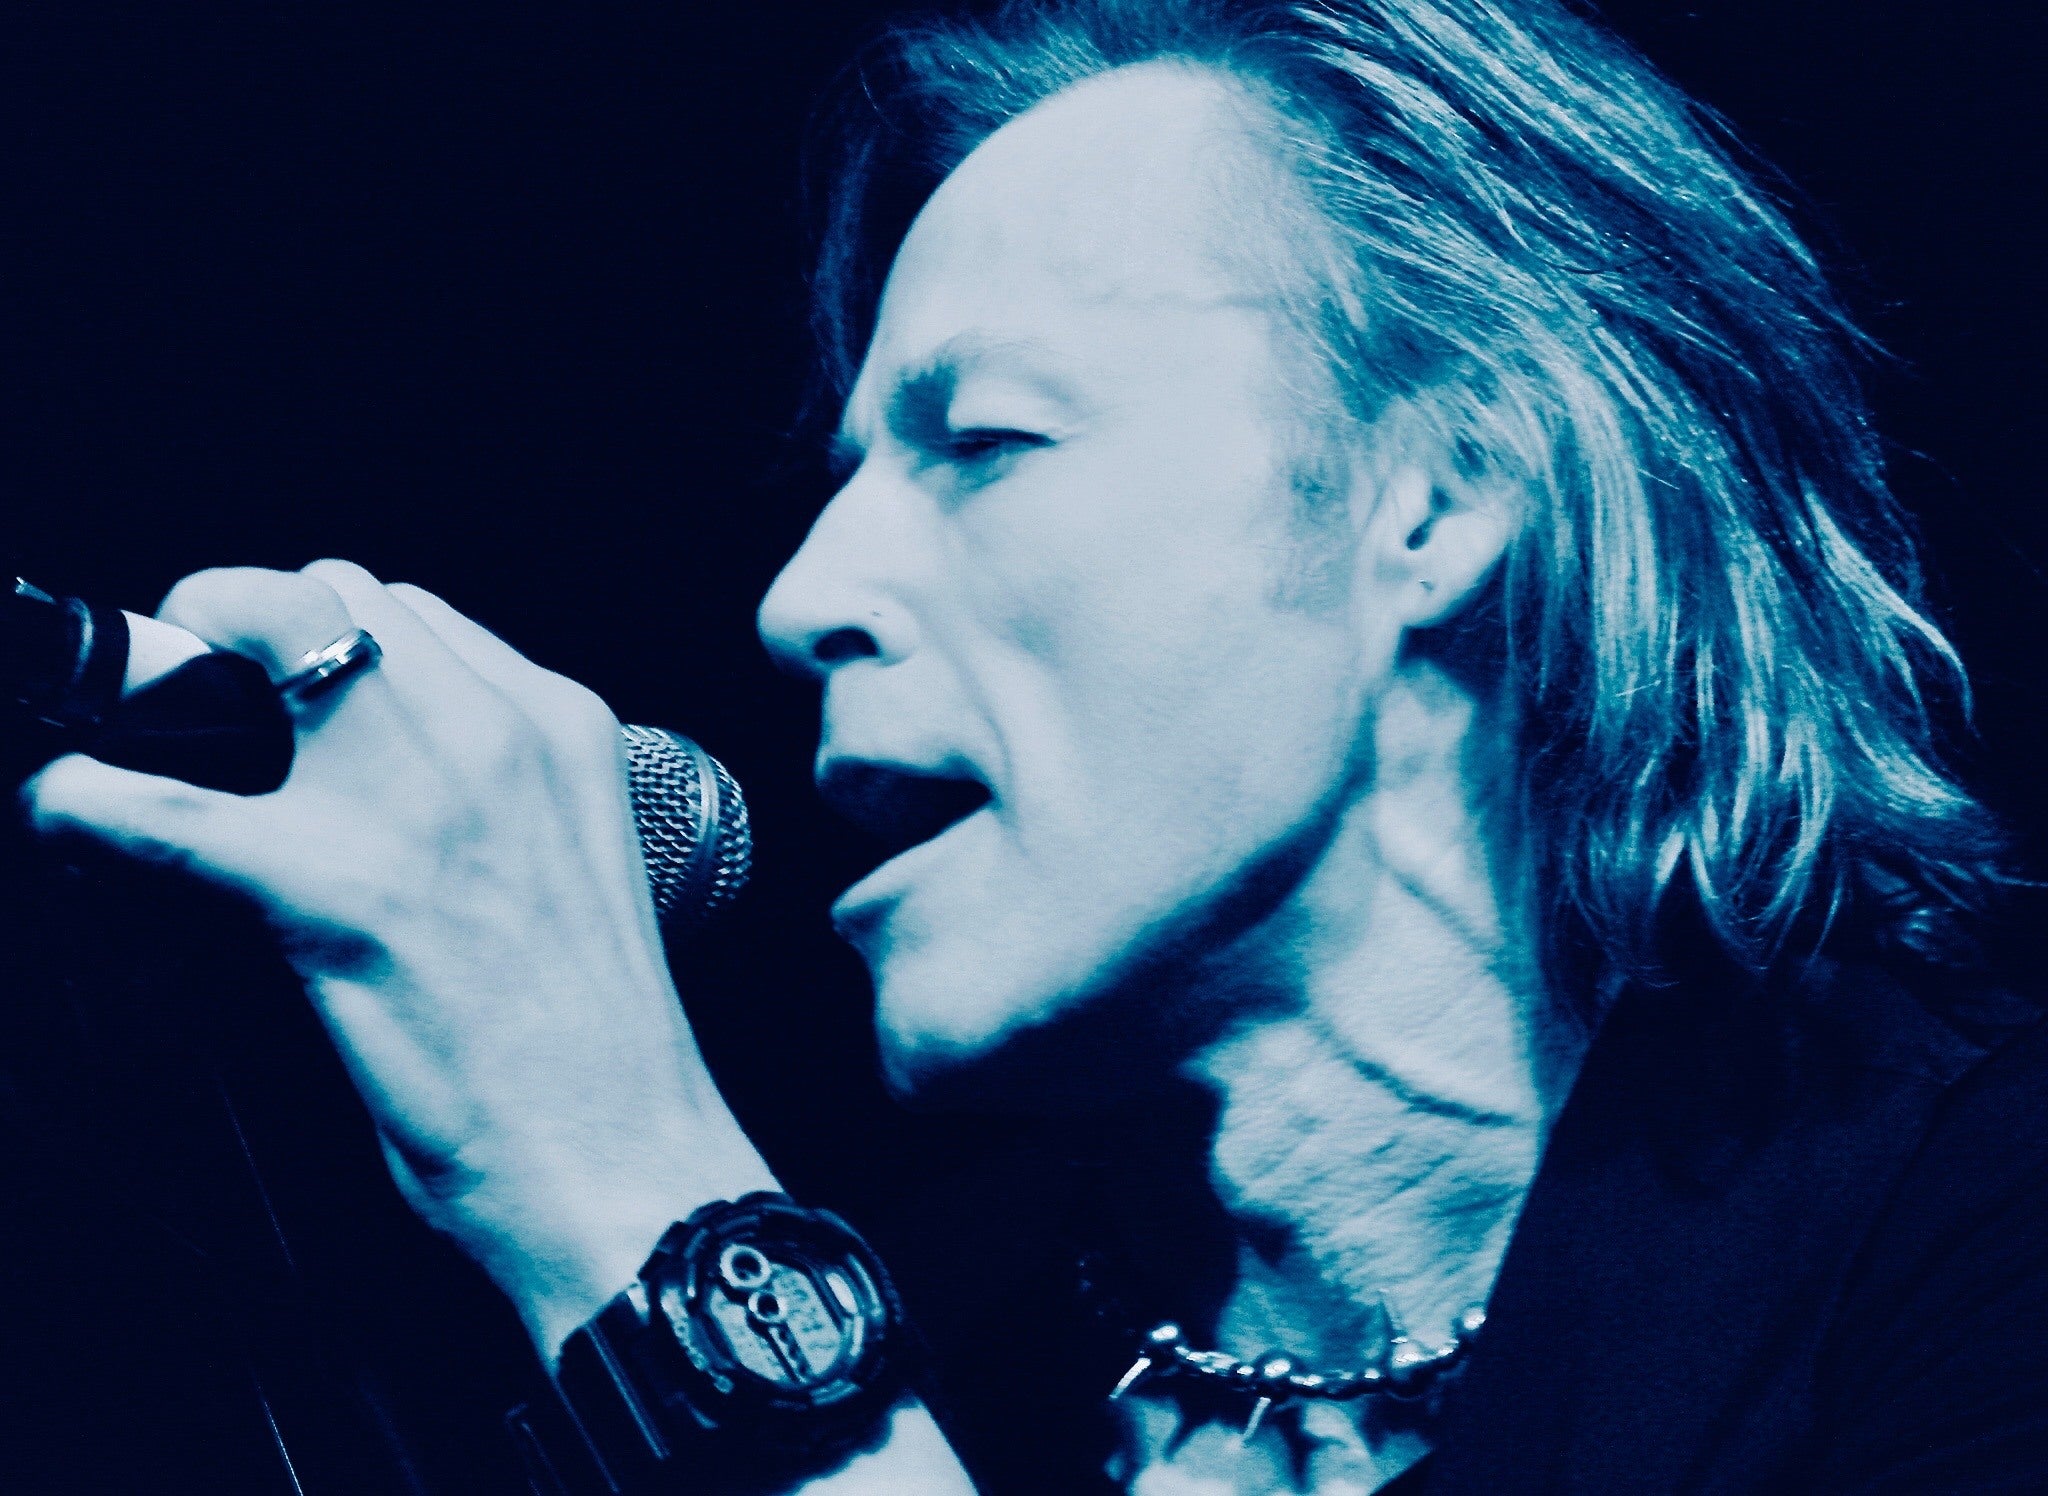 Then Jerico in Oxford promo photo for Priority from o2 presale offer code